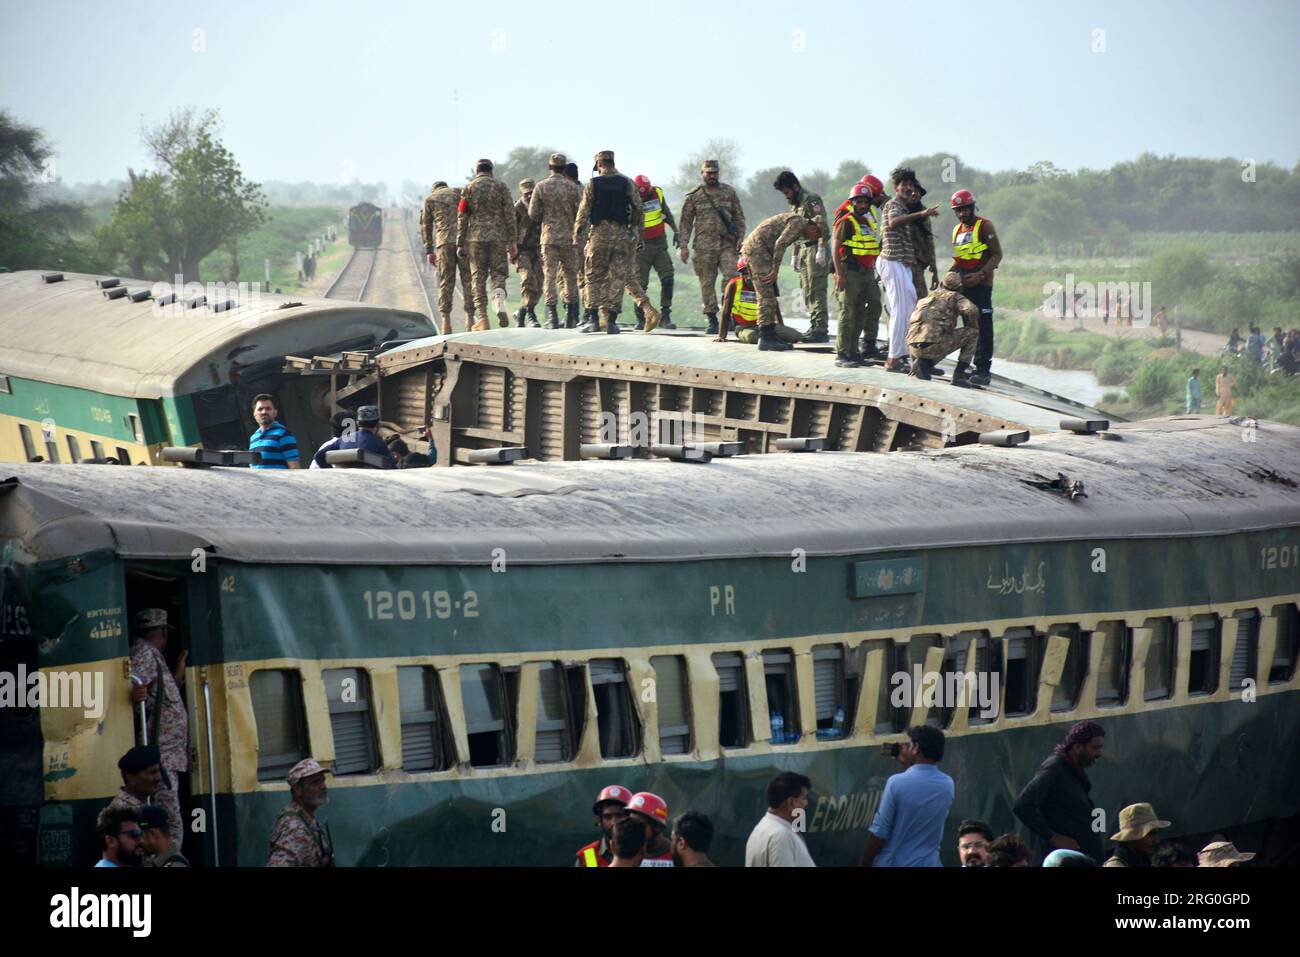 (230807) -- SANGHAR, Aug. 7, 2023 (Xinhua) -- Paramilitary personnel search for victims on derailed coaches of a passenger train in Sanghar district of Pakistan's southern Sindh province, on Aug. 6, 2023. At least 22 people were killed and over 50 others injured on Sunday after a passenger train derailed in the Sanghar district of Pakistan's southern Sindh province, local police said.The accident took place when 10 coaches of the Hazara Express train derailed when it was crossing a canal bridge near Sarhari town in the Shahdadpur area of the district, Muhammad Younis Chandio, deputy inspector Stock Photo